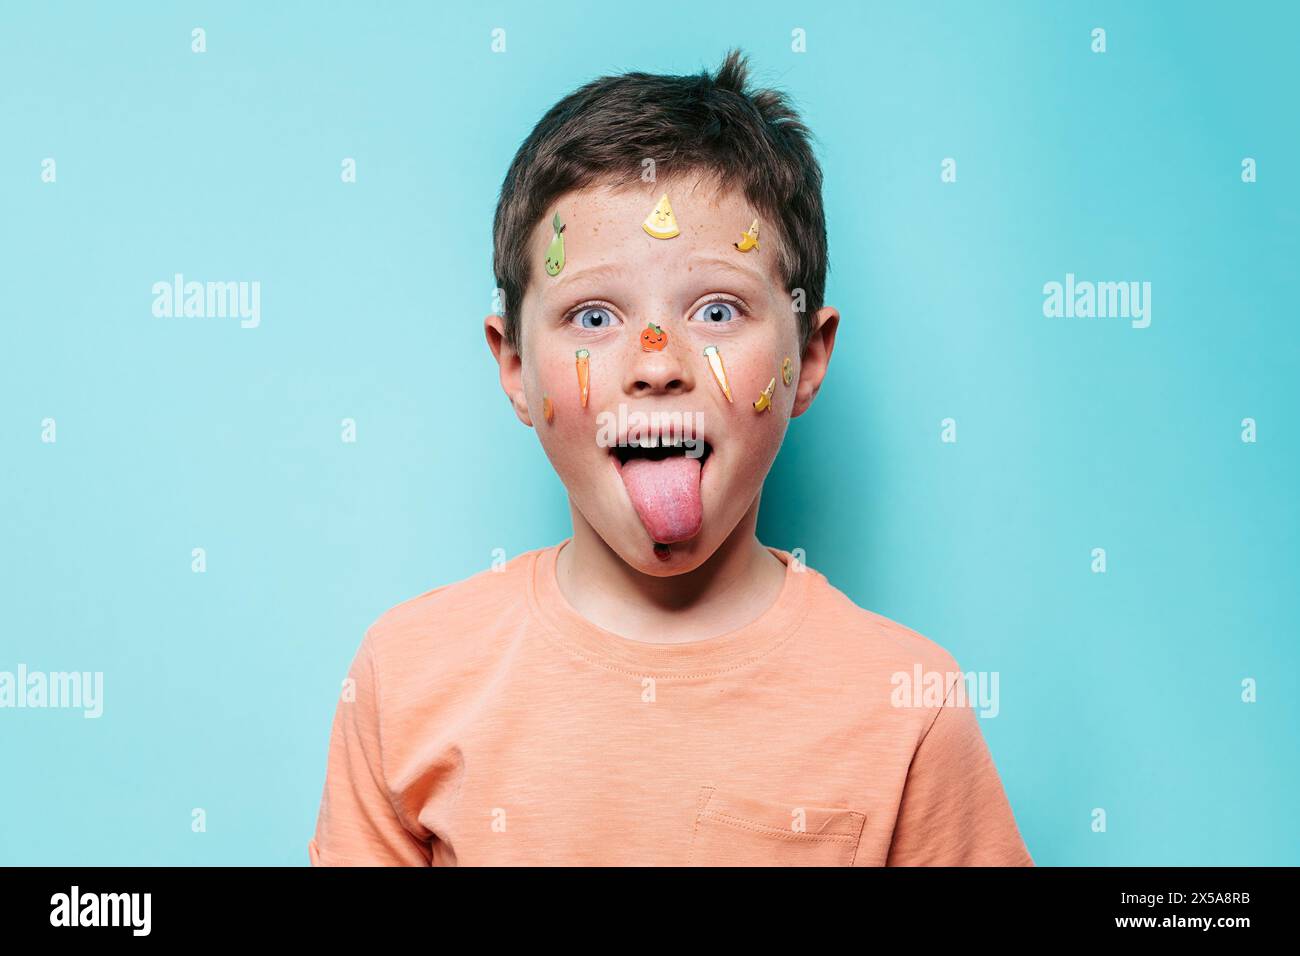 A young boy sticks out his tongue, face adorned with vibrant fruit stickers, against a teal background Stock Photo